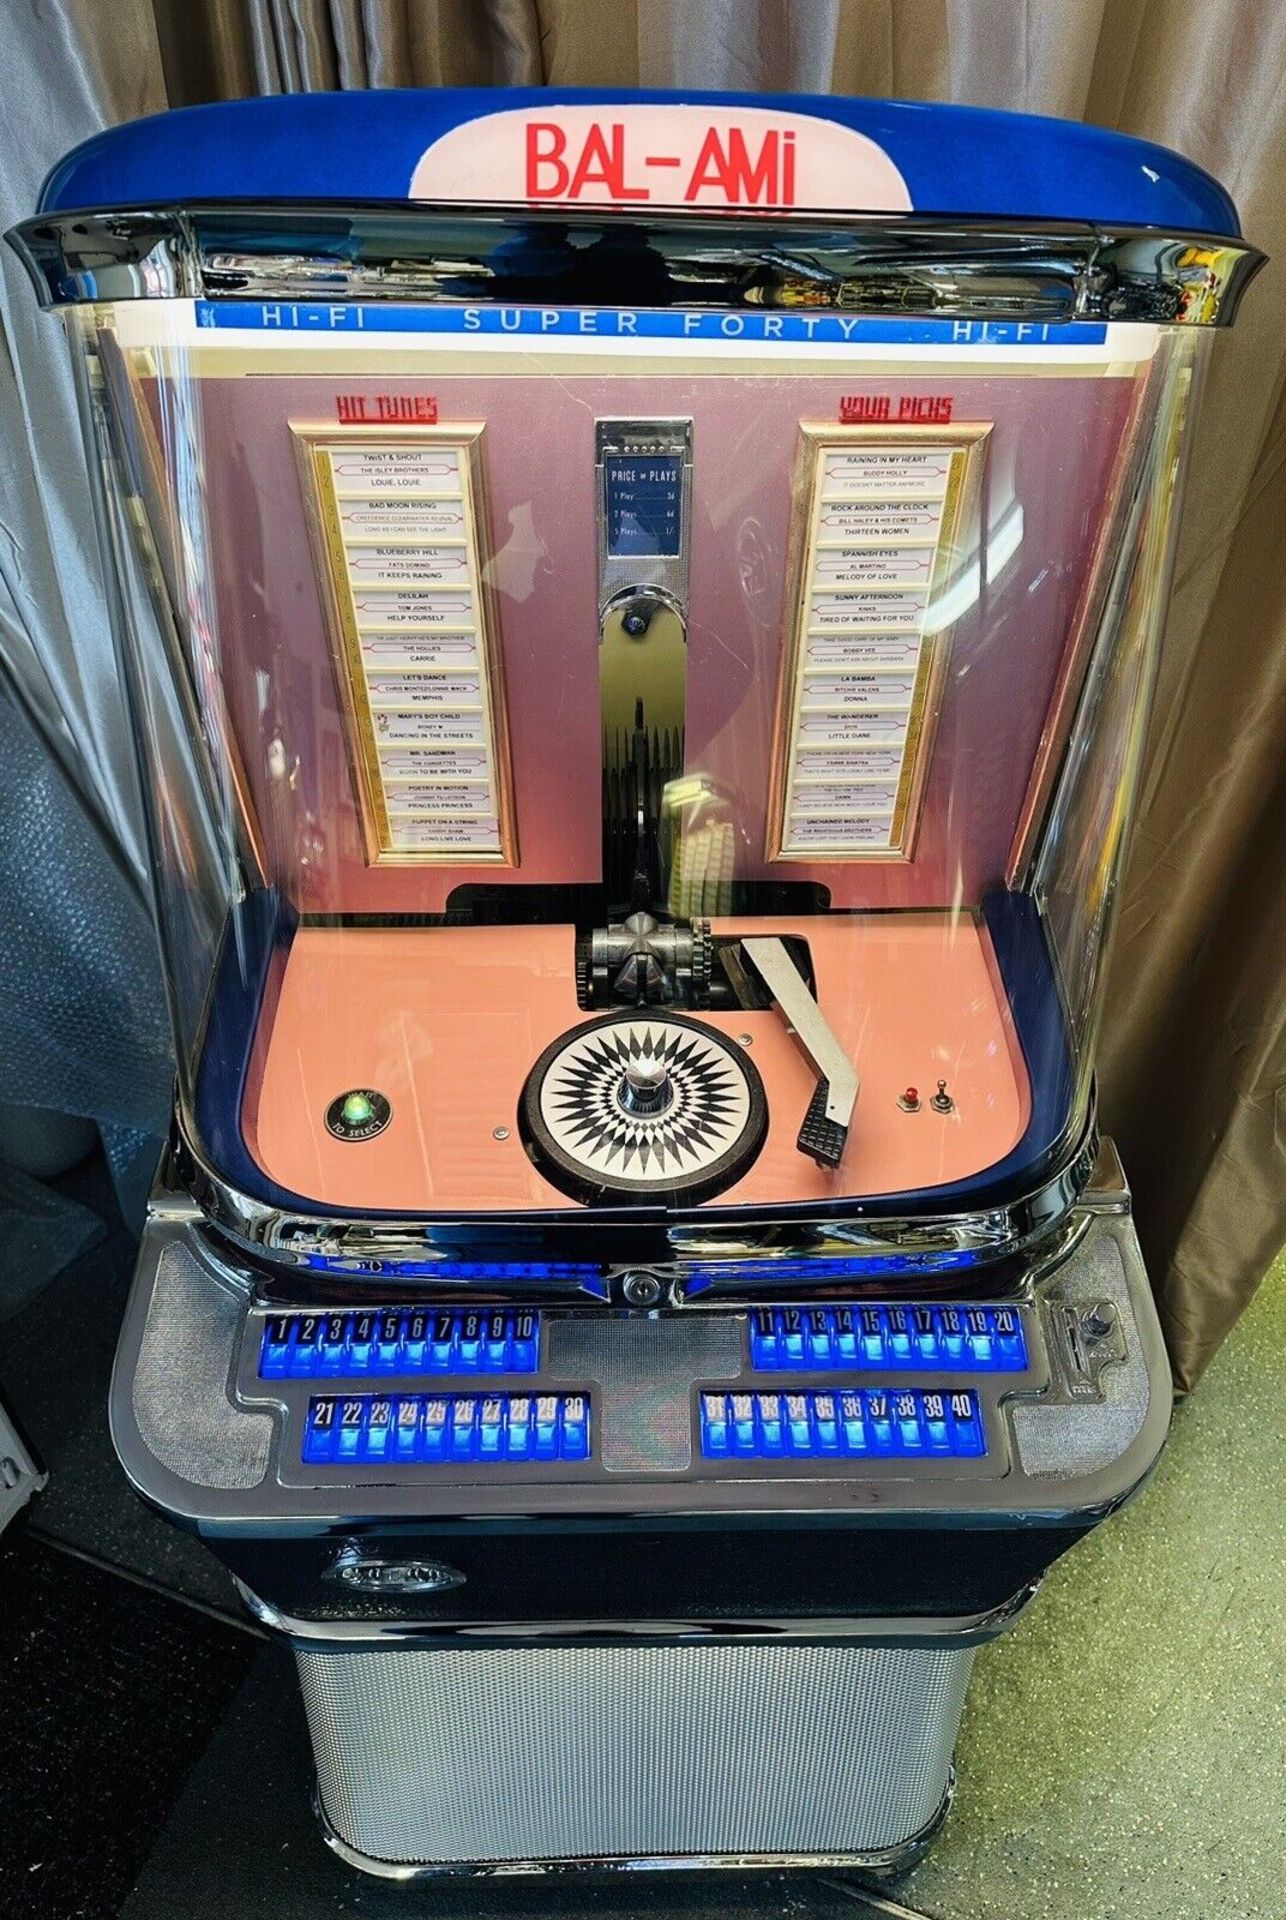 1957 FULLY Restored Bal Ami Super 40 Jukebox   This is a beautiful little machine and holds 20 7”